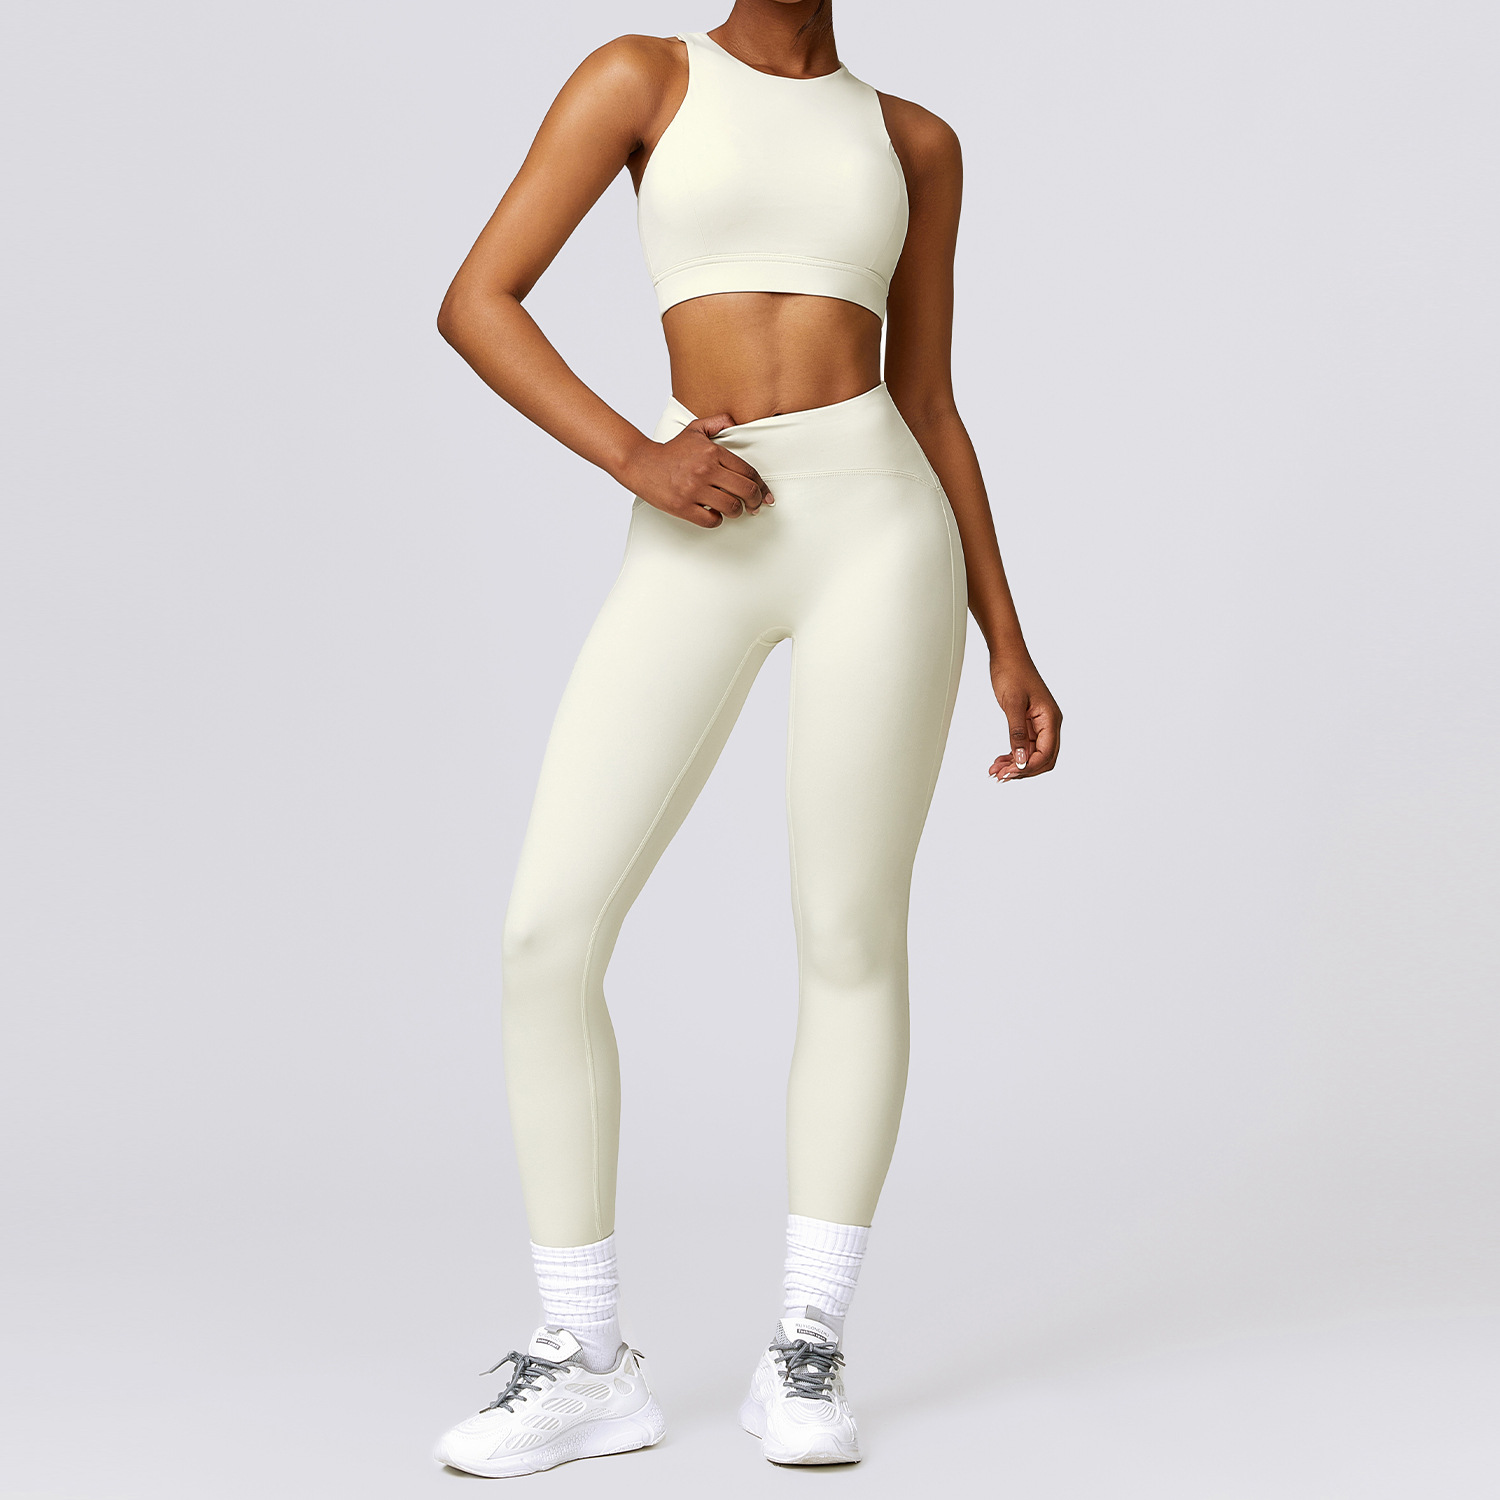 fitness clothing manufacturer